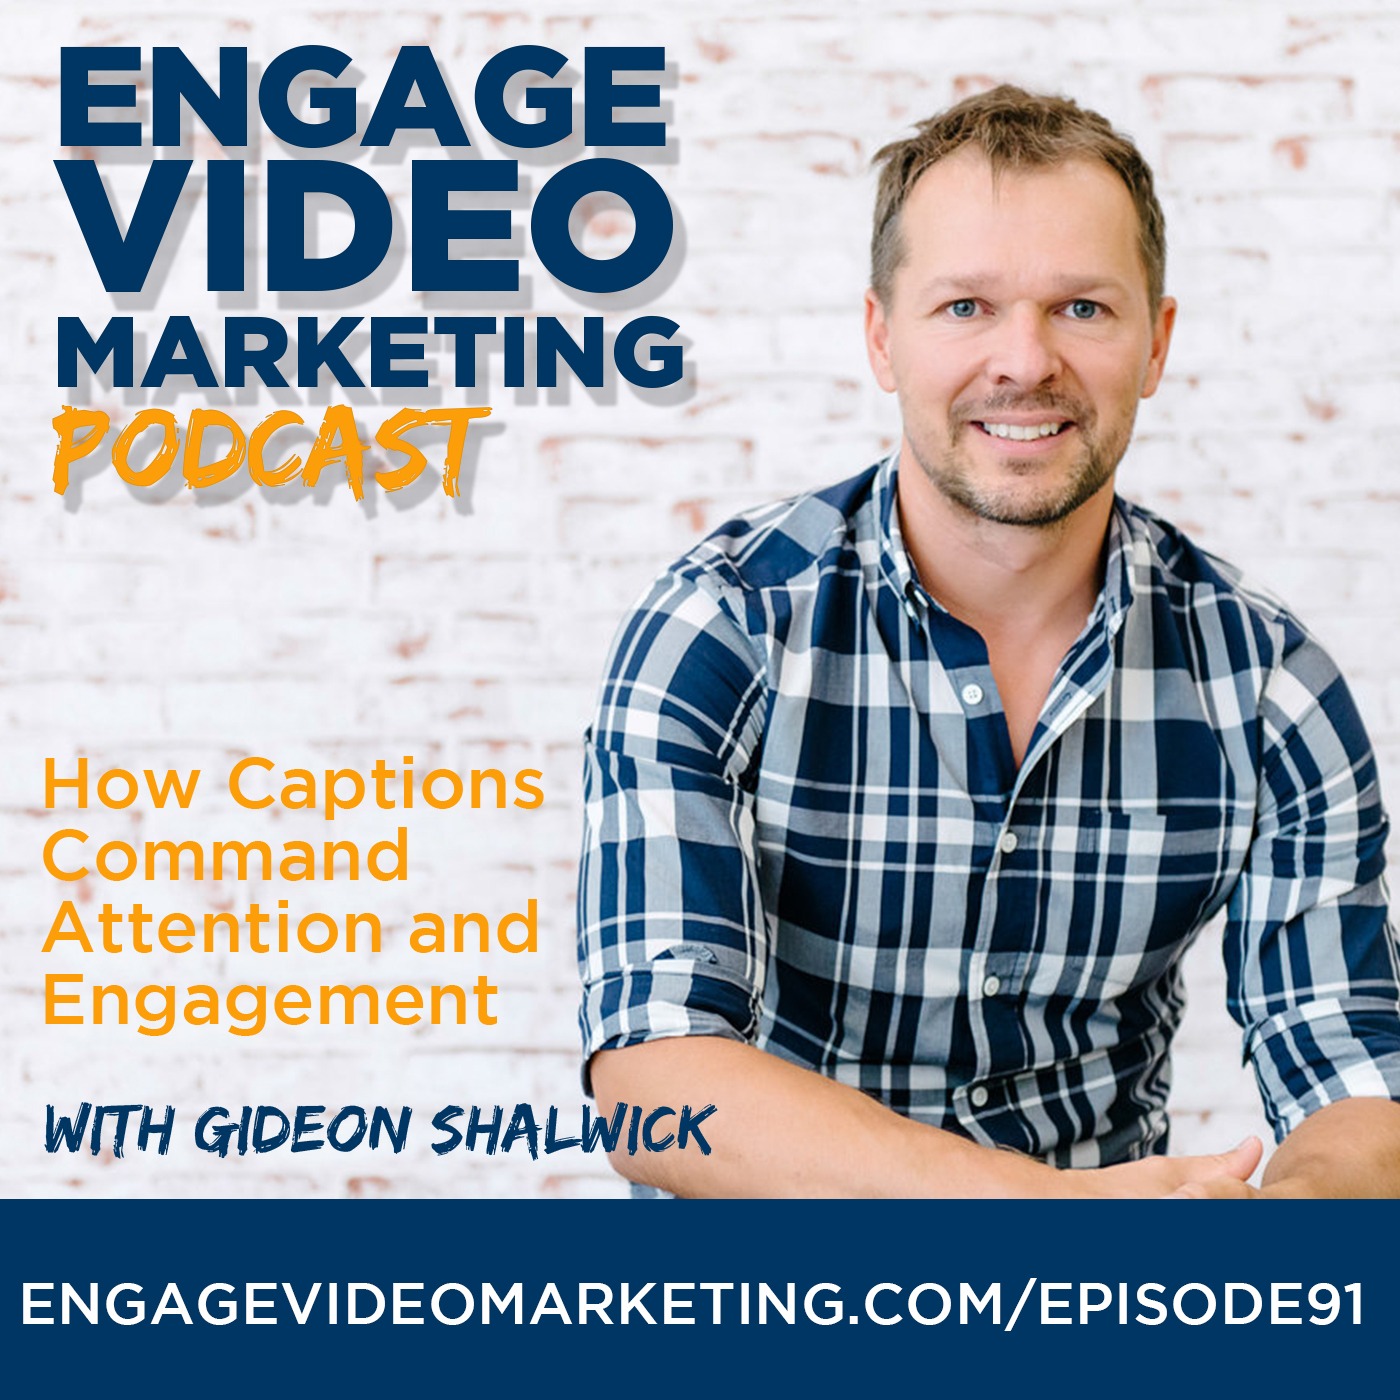 How Captions Command Attention and Engagement with Gideon Shalwick